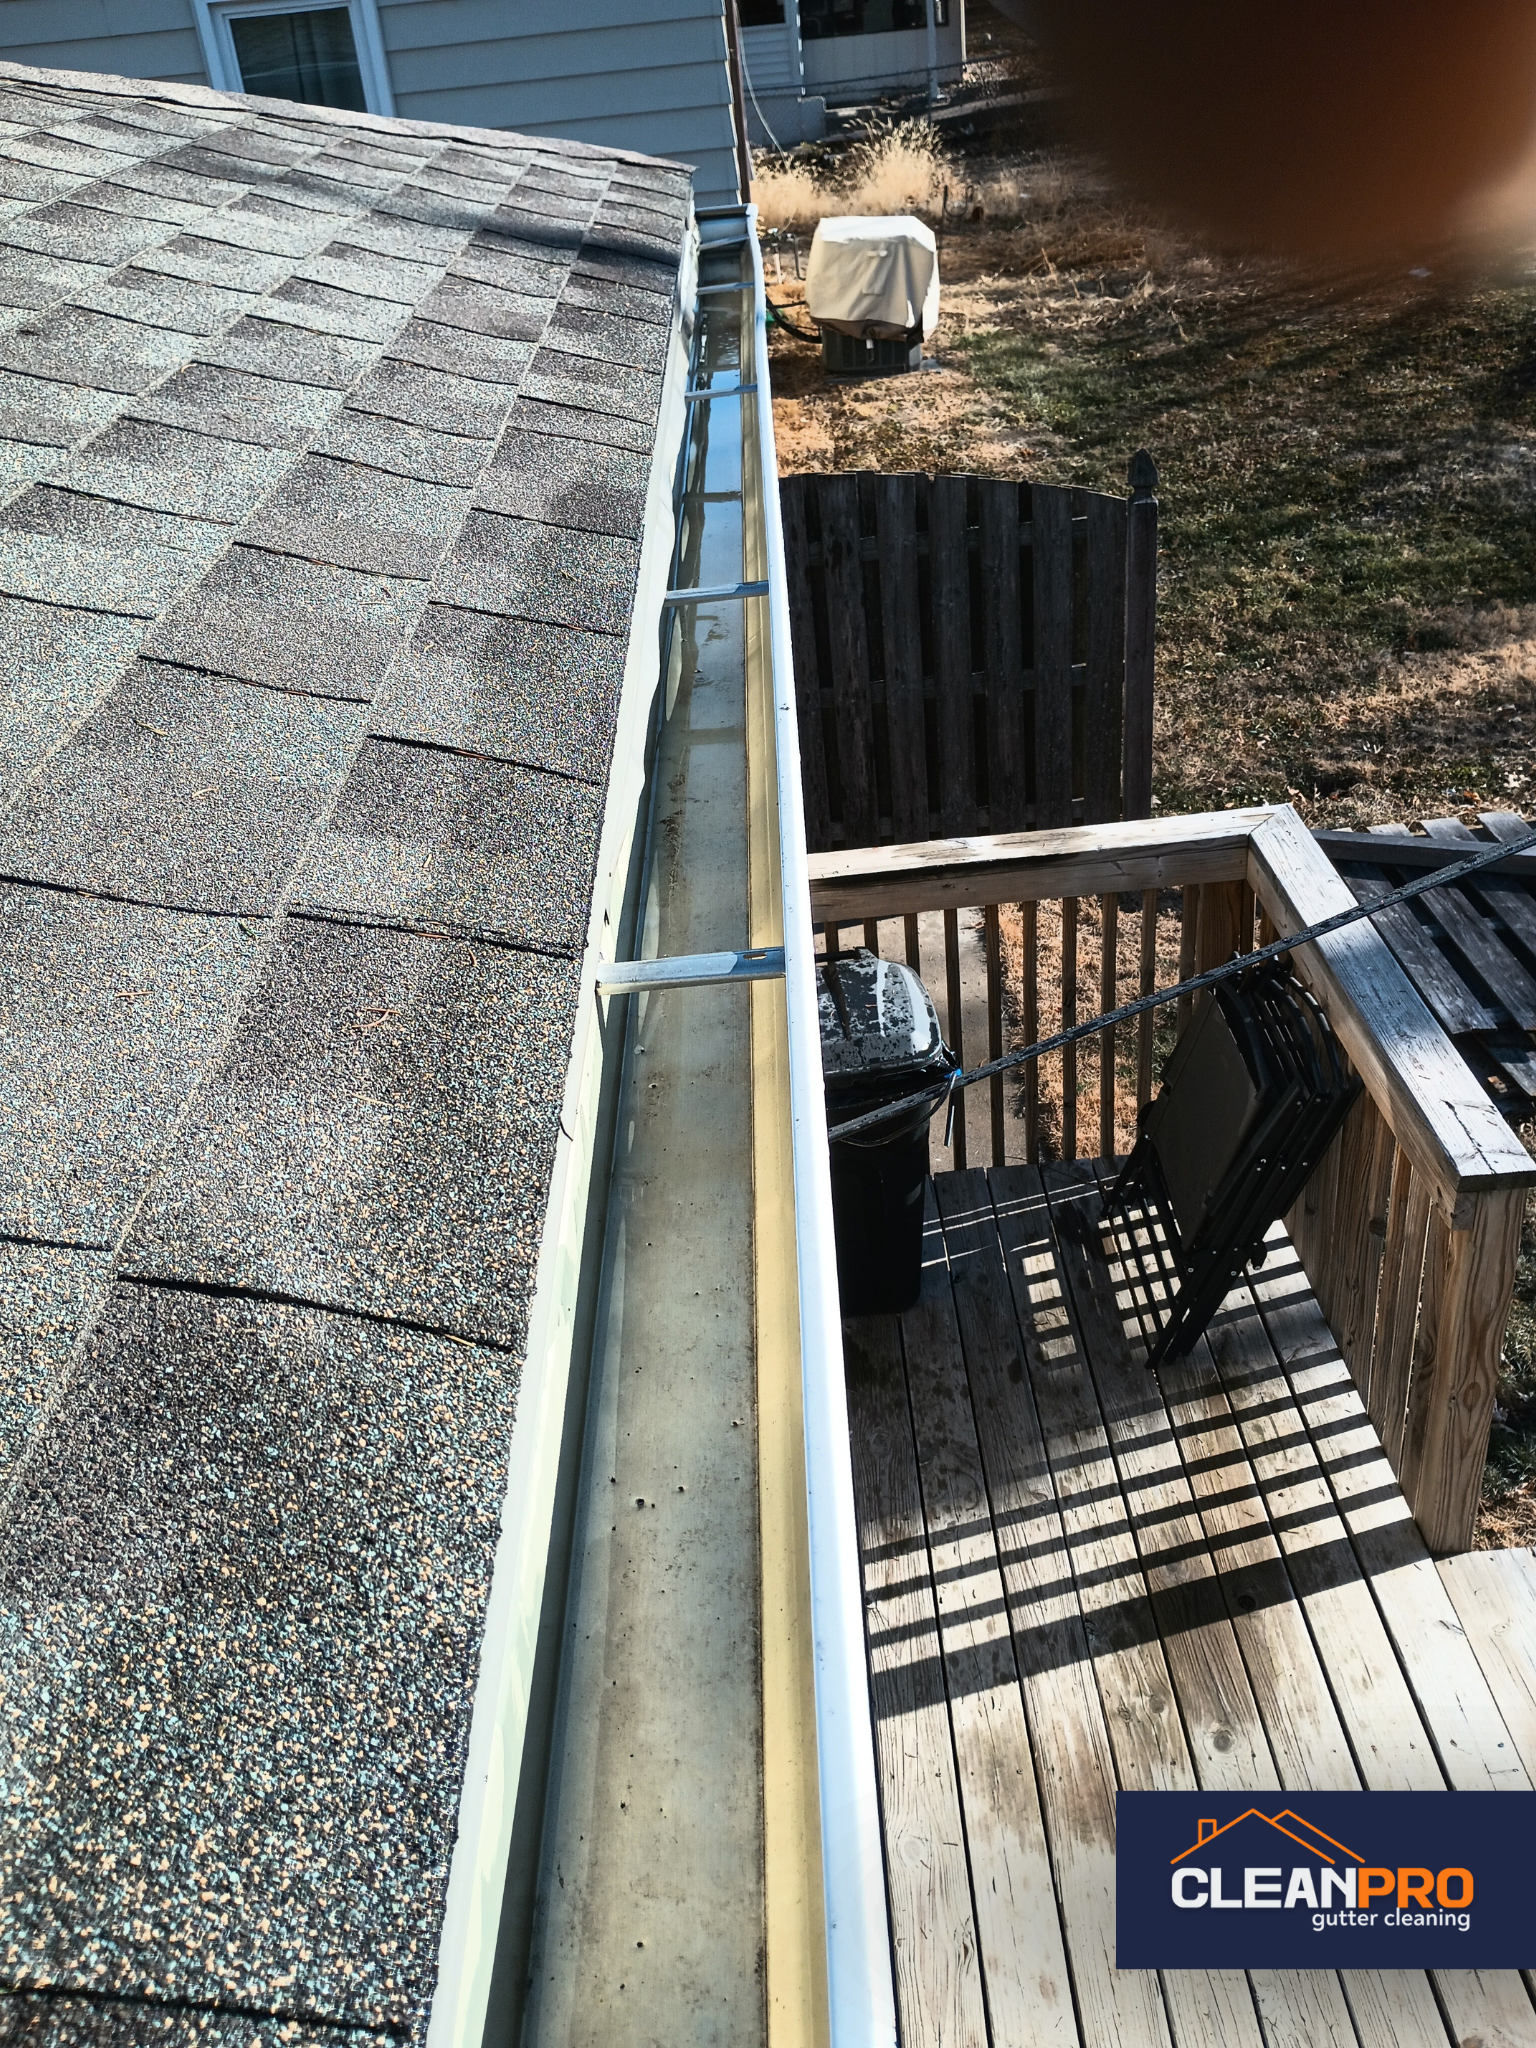 Local Gutter Cleaning in Dallas , TX